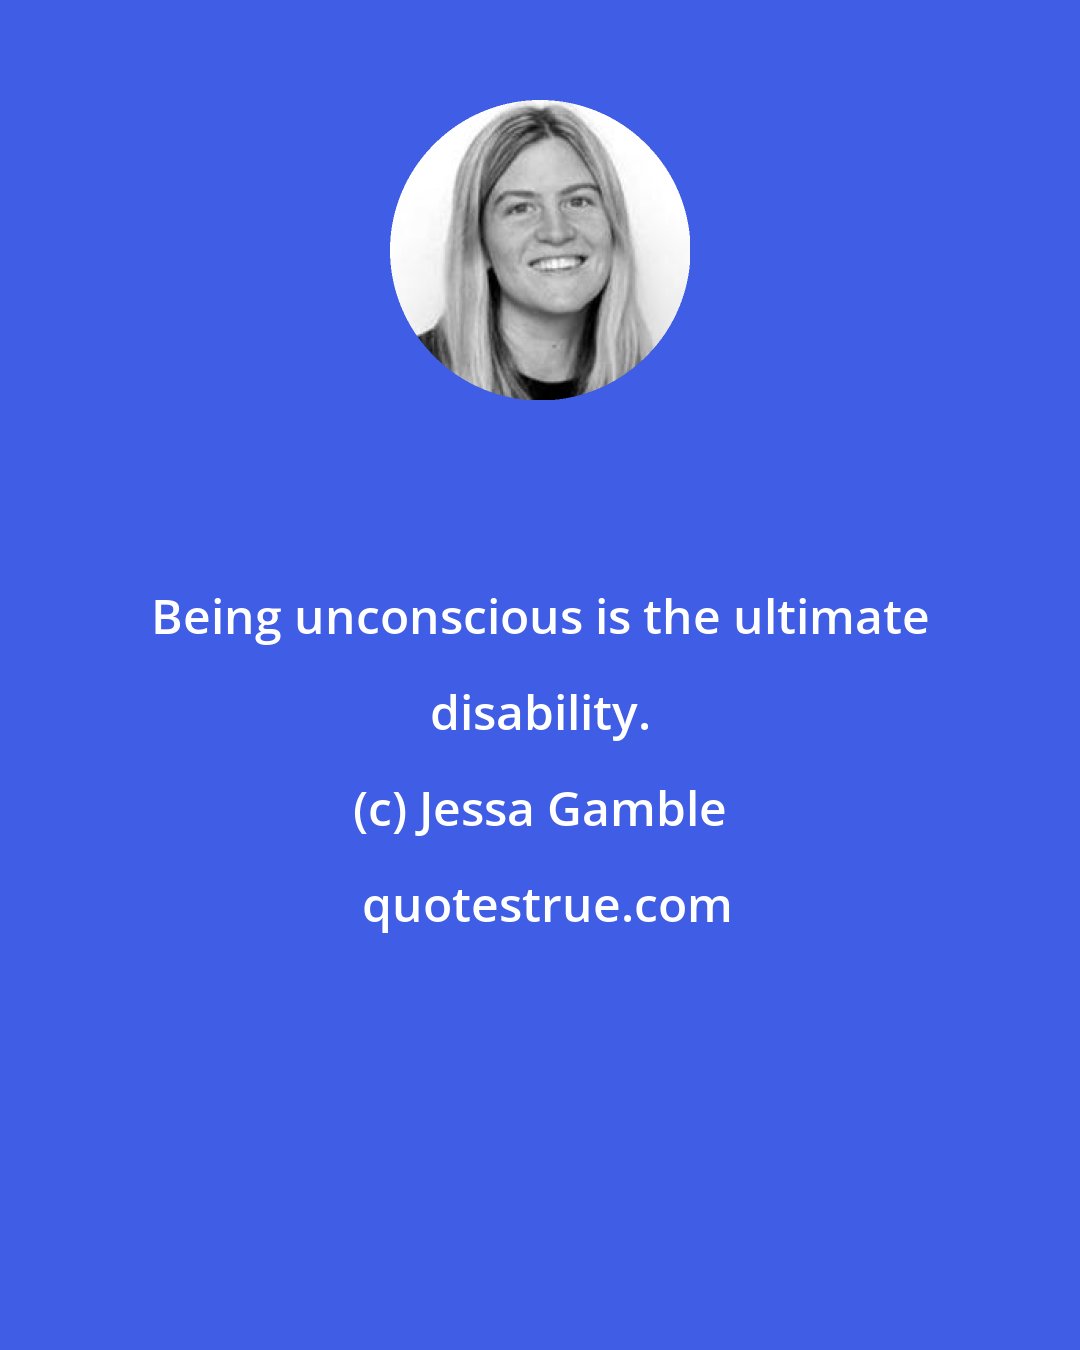 Jessa Gamble: Being unconscious is the ultimate disability.